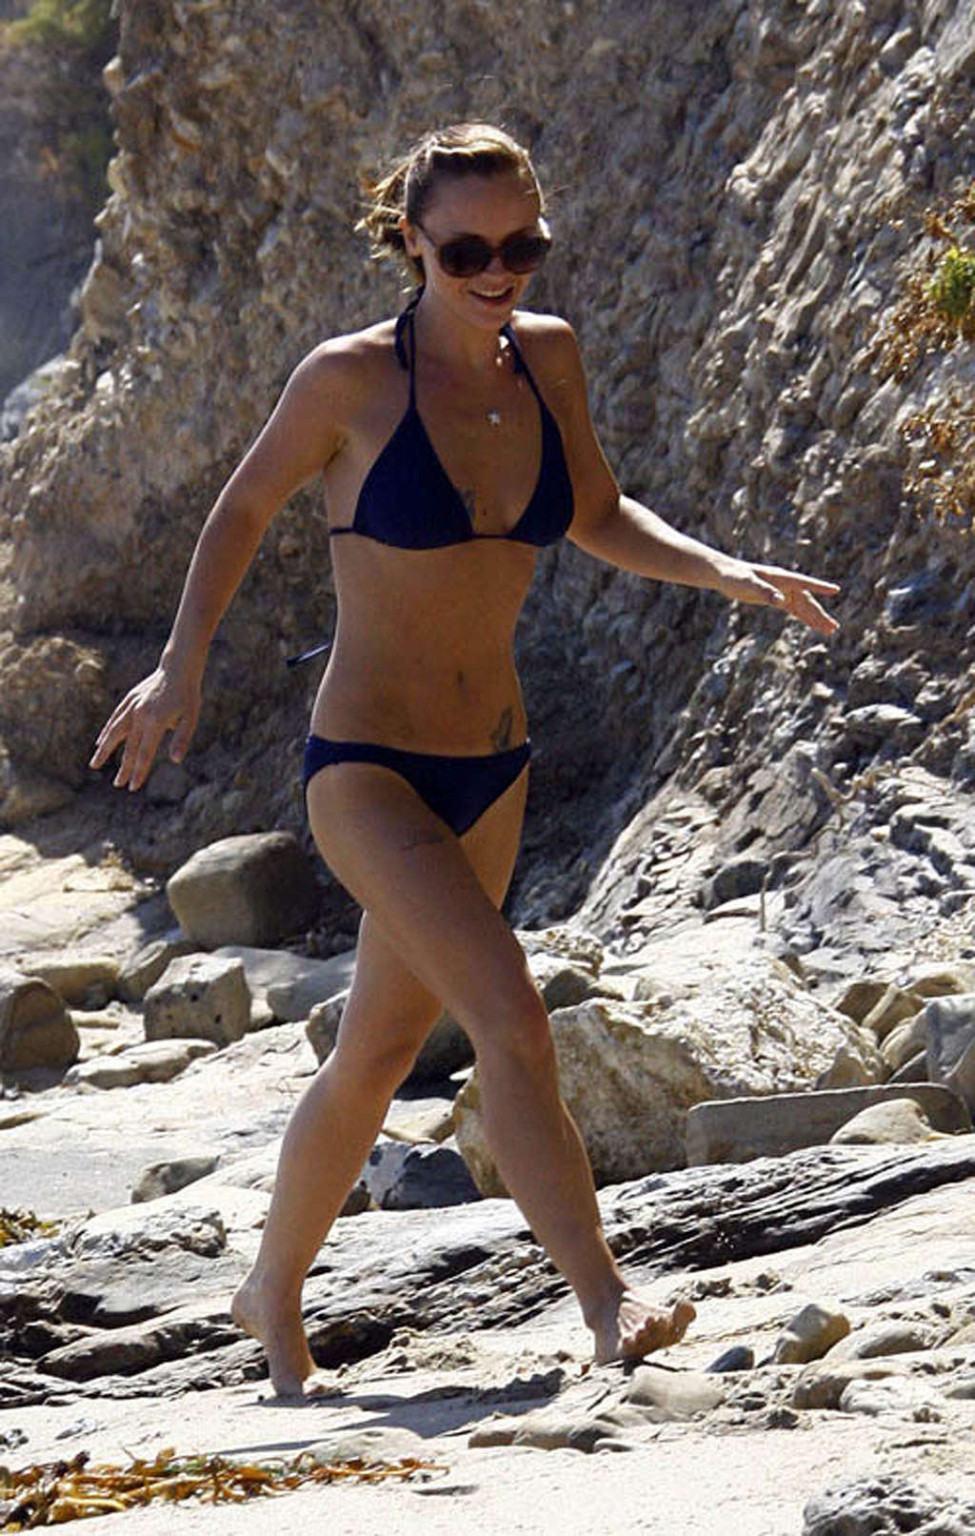 Christina Ricci looking very drunk in bikini with a beer in a hand #75332575